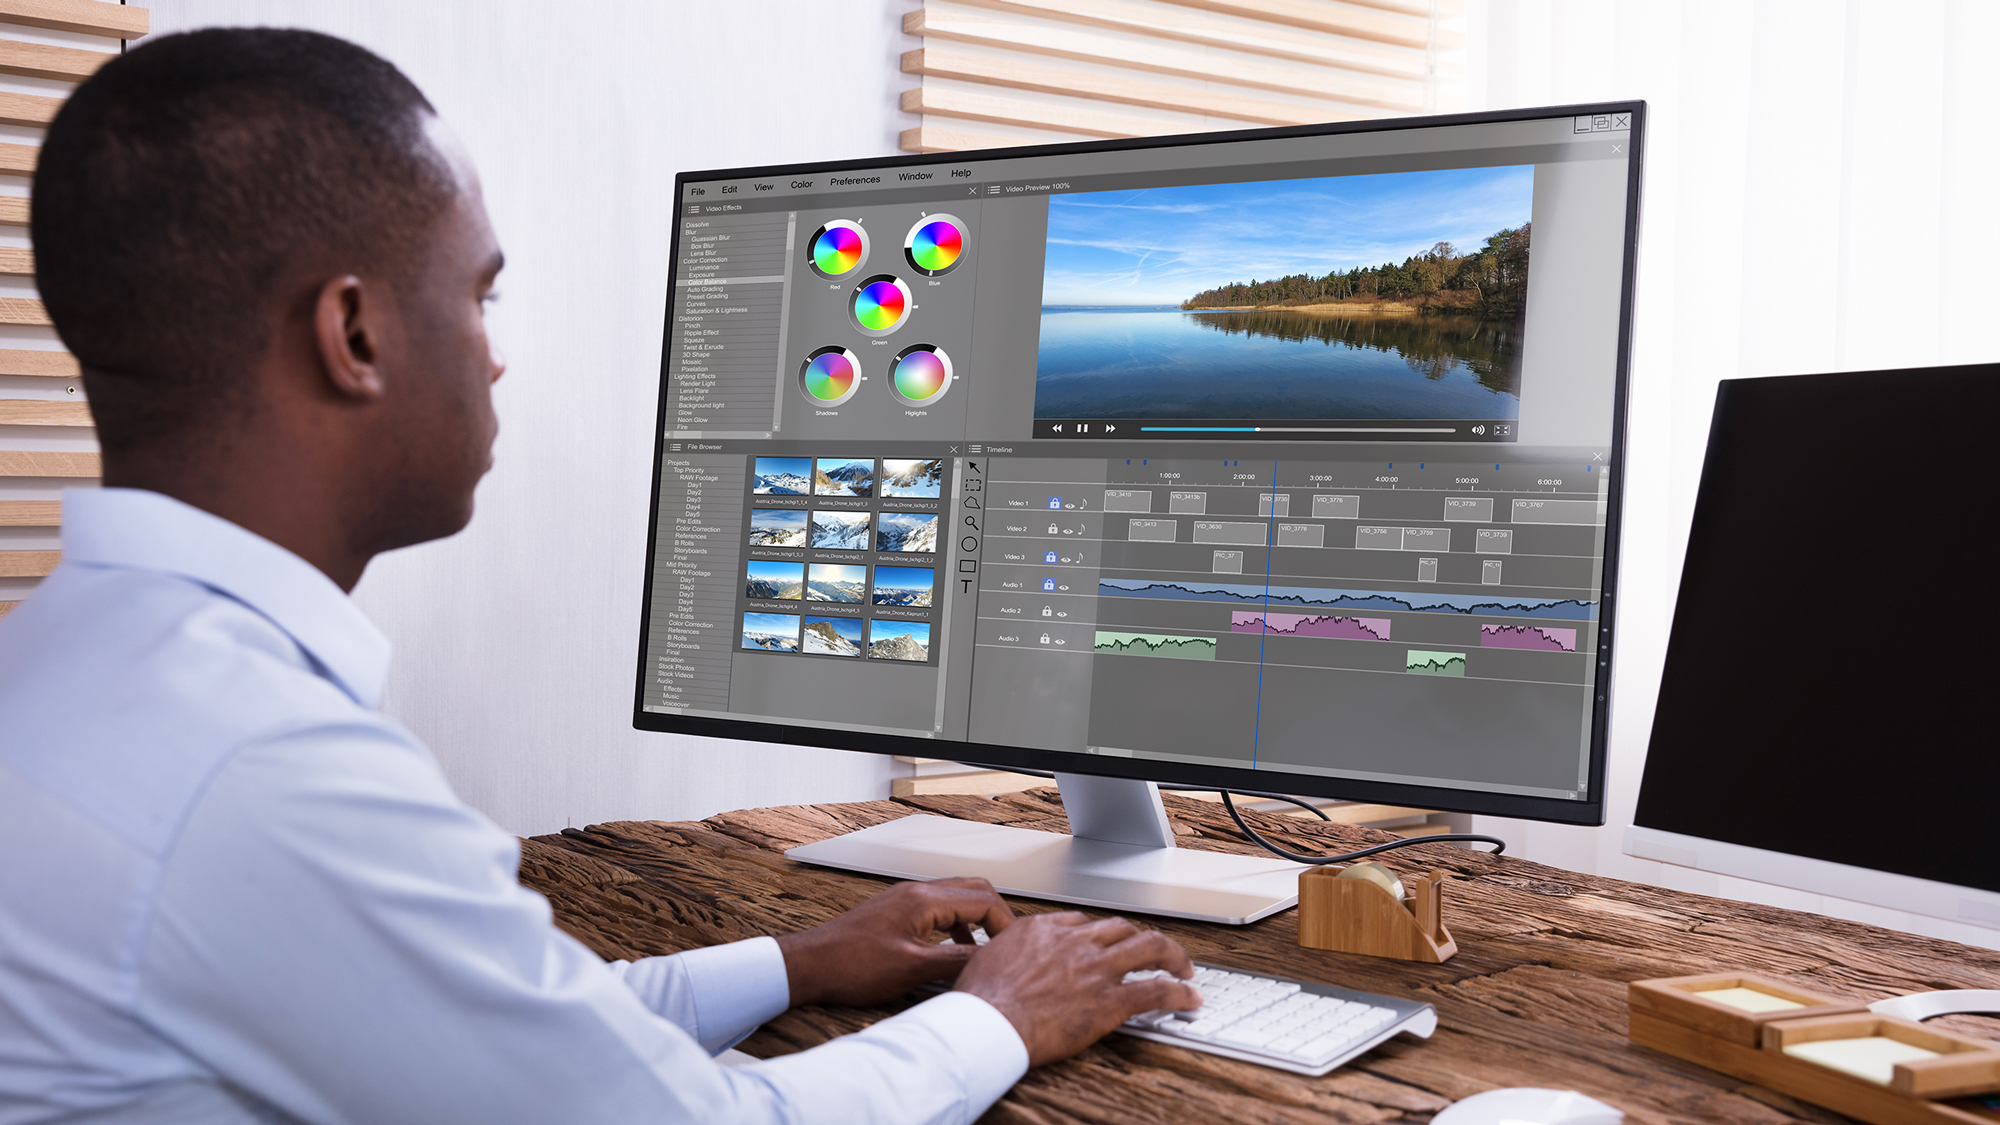 video editing software for both mac and pc